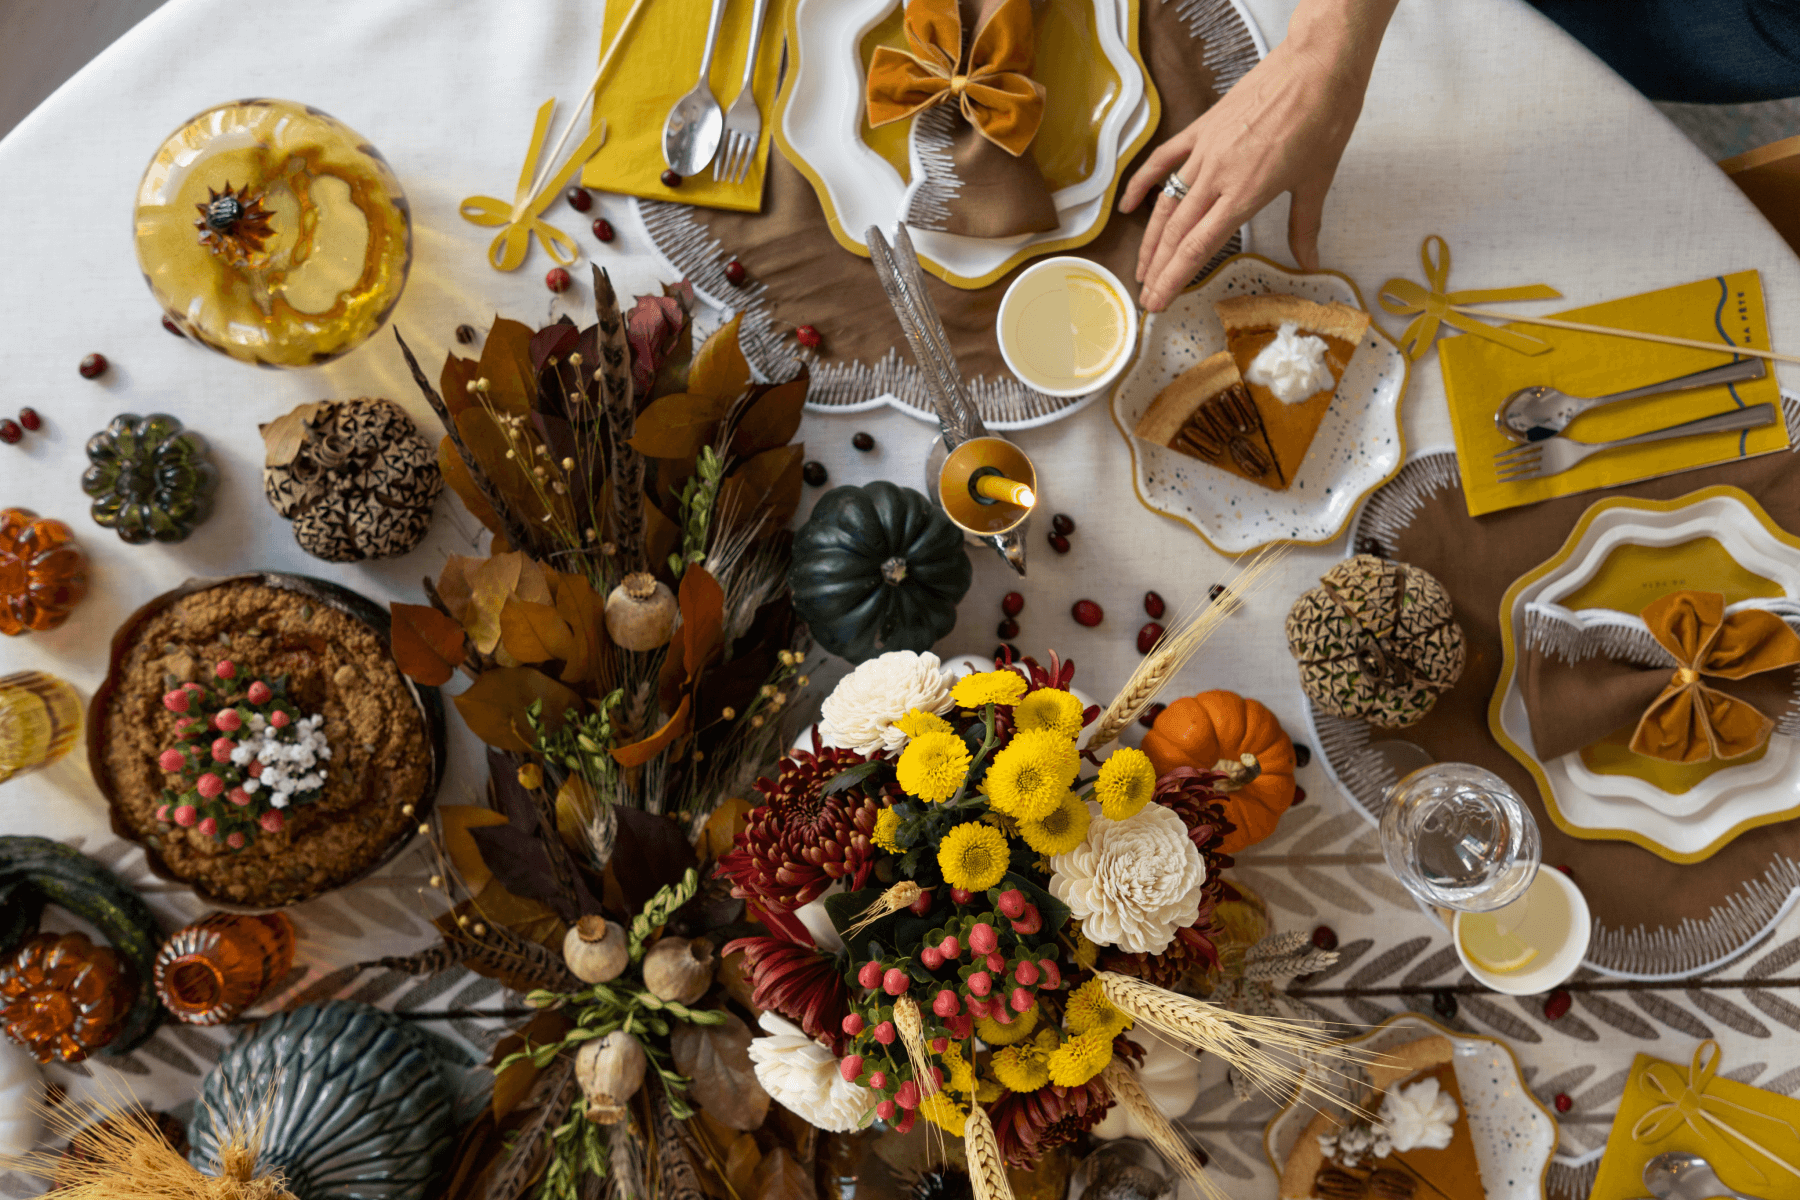 Favorite Tabletop Essentials To Set A Thanksgiving Table